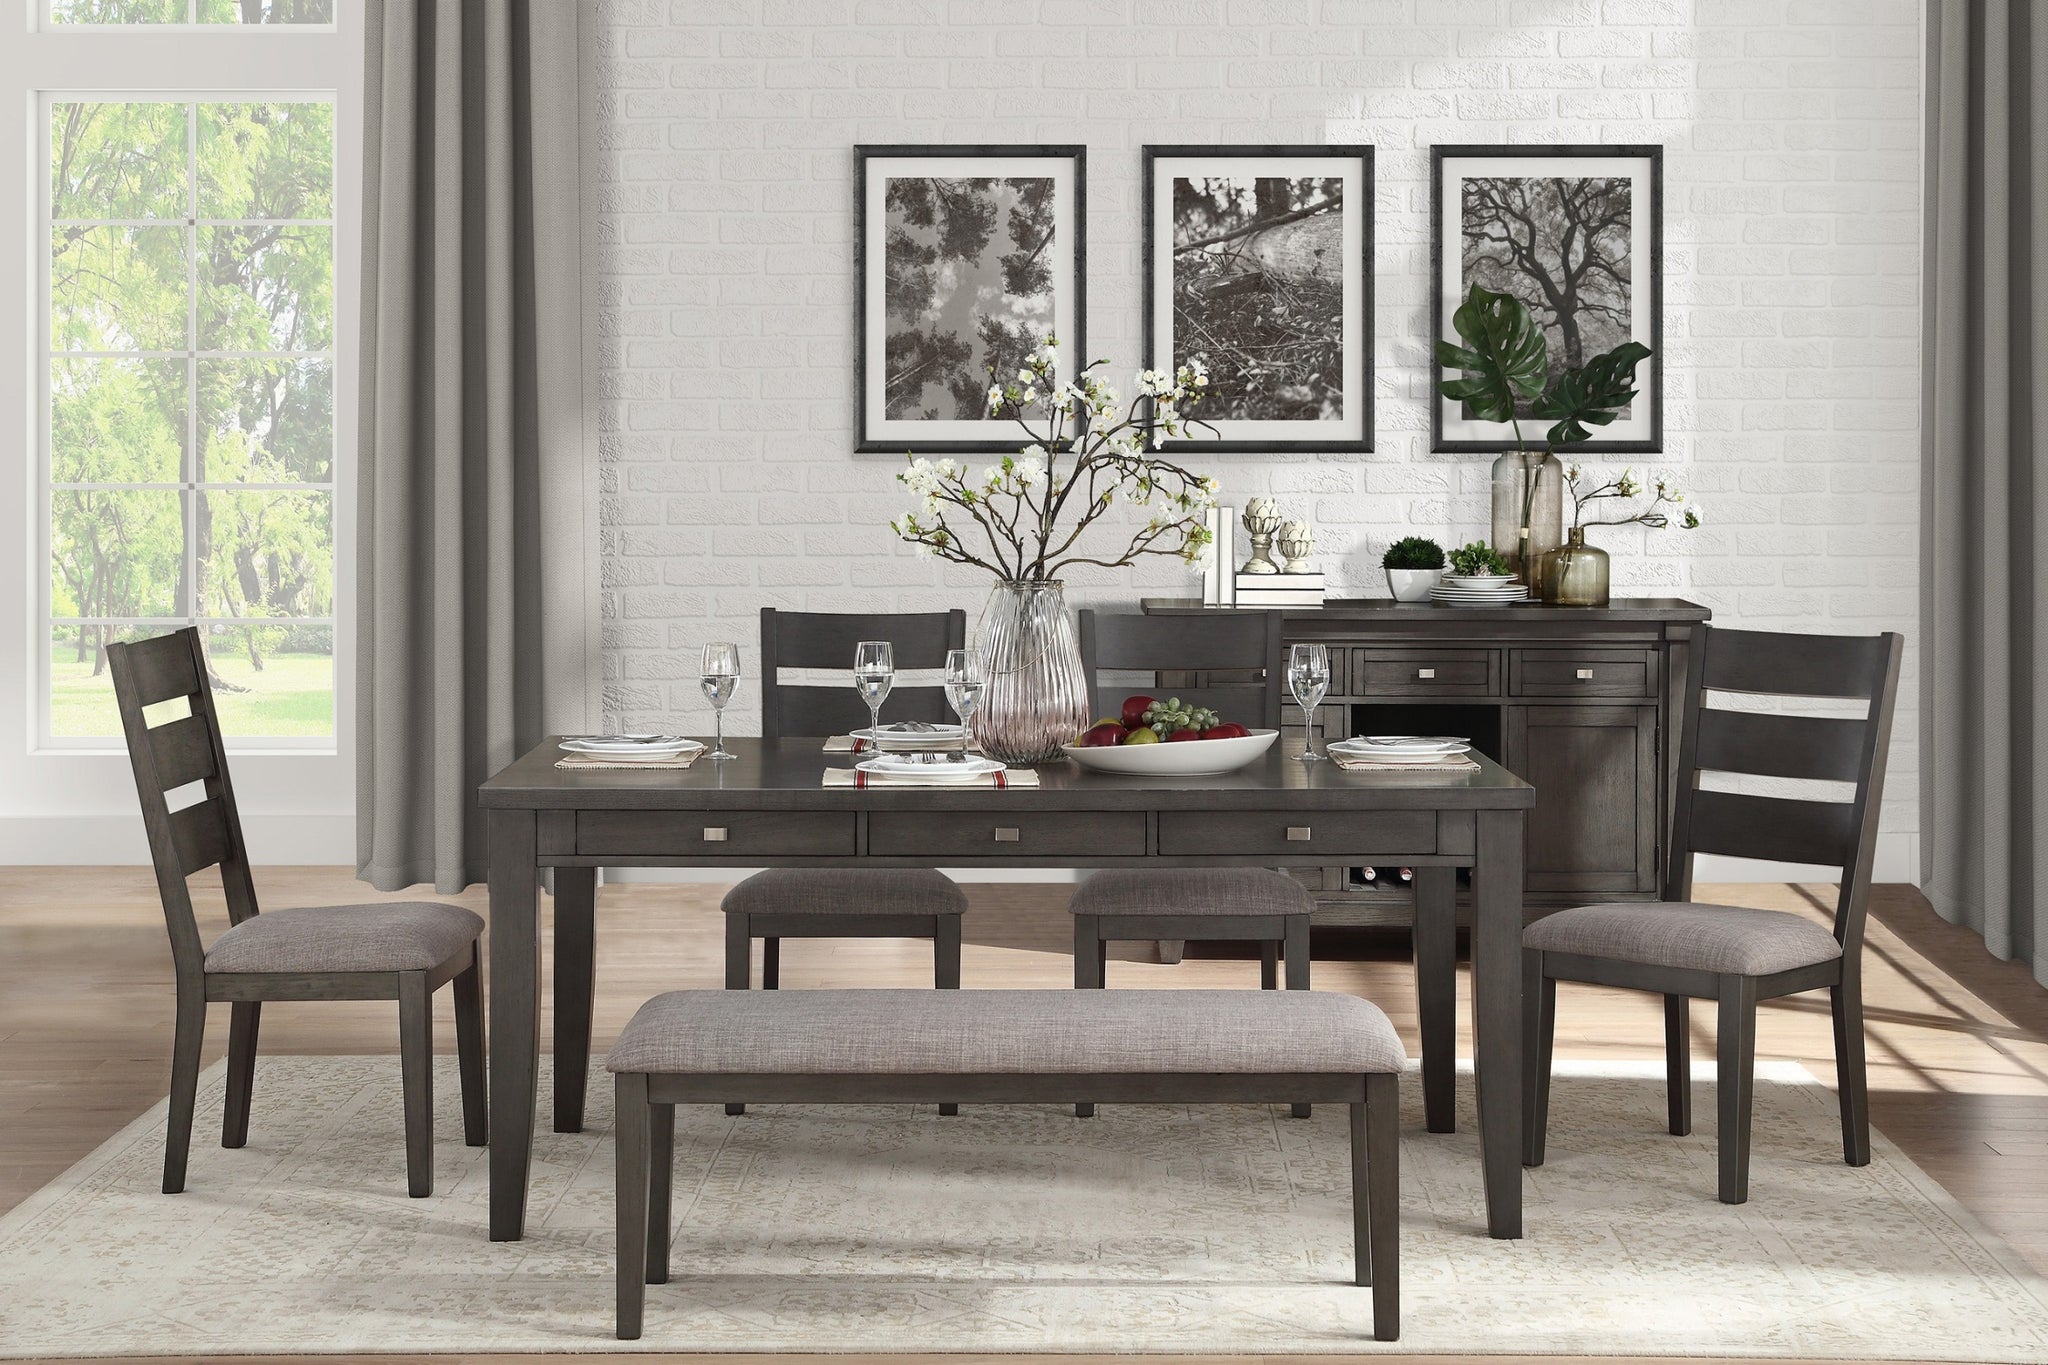 Transitional Look Gray Finish Wood Framed 1pc Bench gray-dining room-transitional-wood